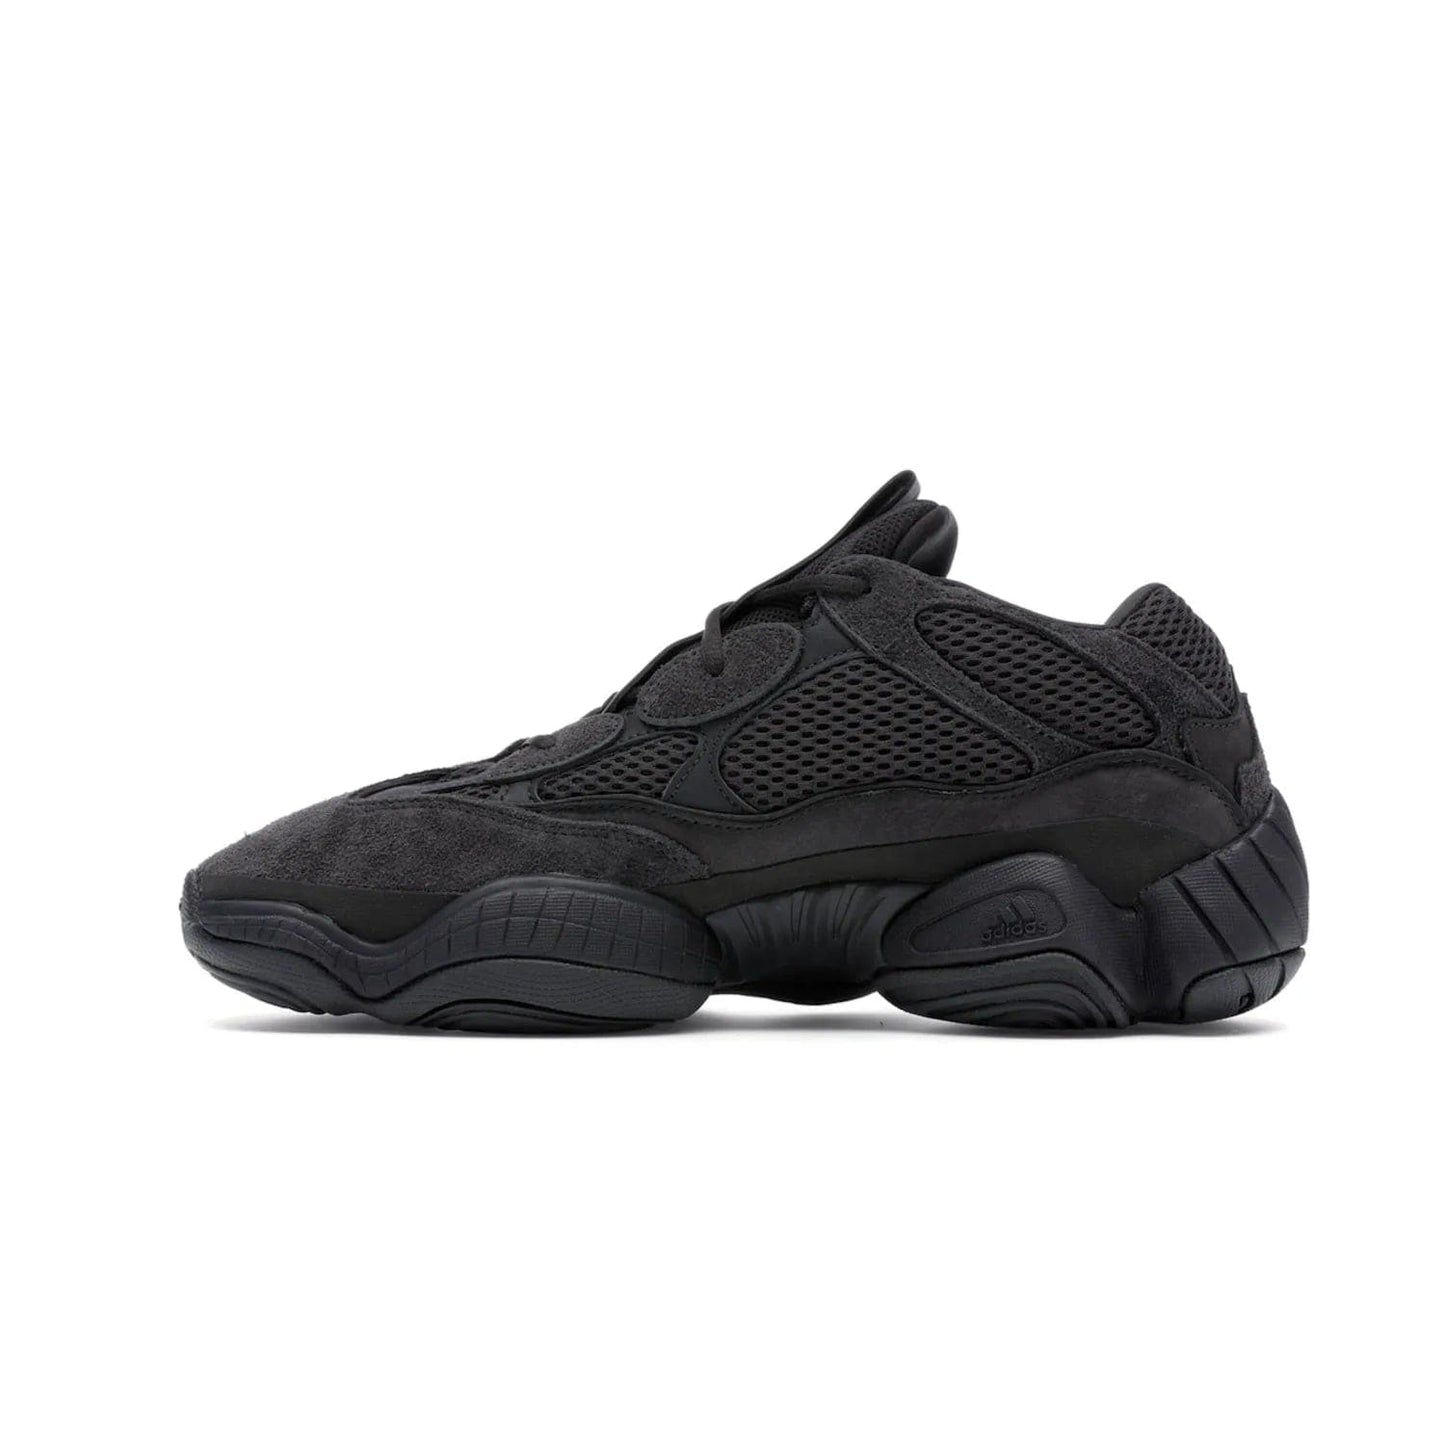 adidas Yeezy 500 Utility Black - Image 20 - Only at www.BallersClubKickz.com - Iconic adidas Yeezy 500 Utility Black in All-Black colorway. Durable black mesh and suede upper with adiPRENE® sole delivers comfort and support. Be unstoppable with the Yeezy 500 Utility Black. Released July 2018.